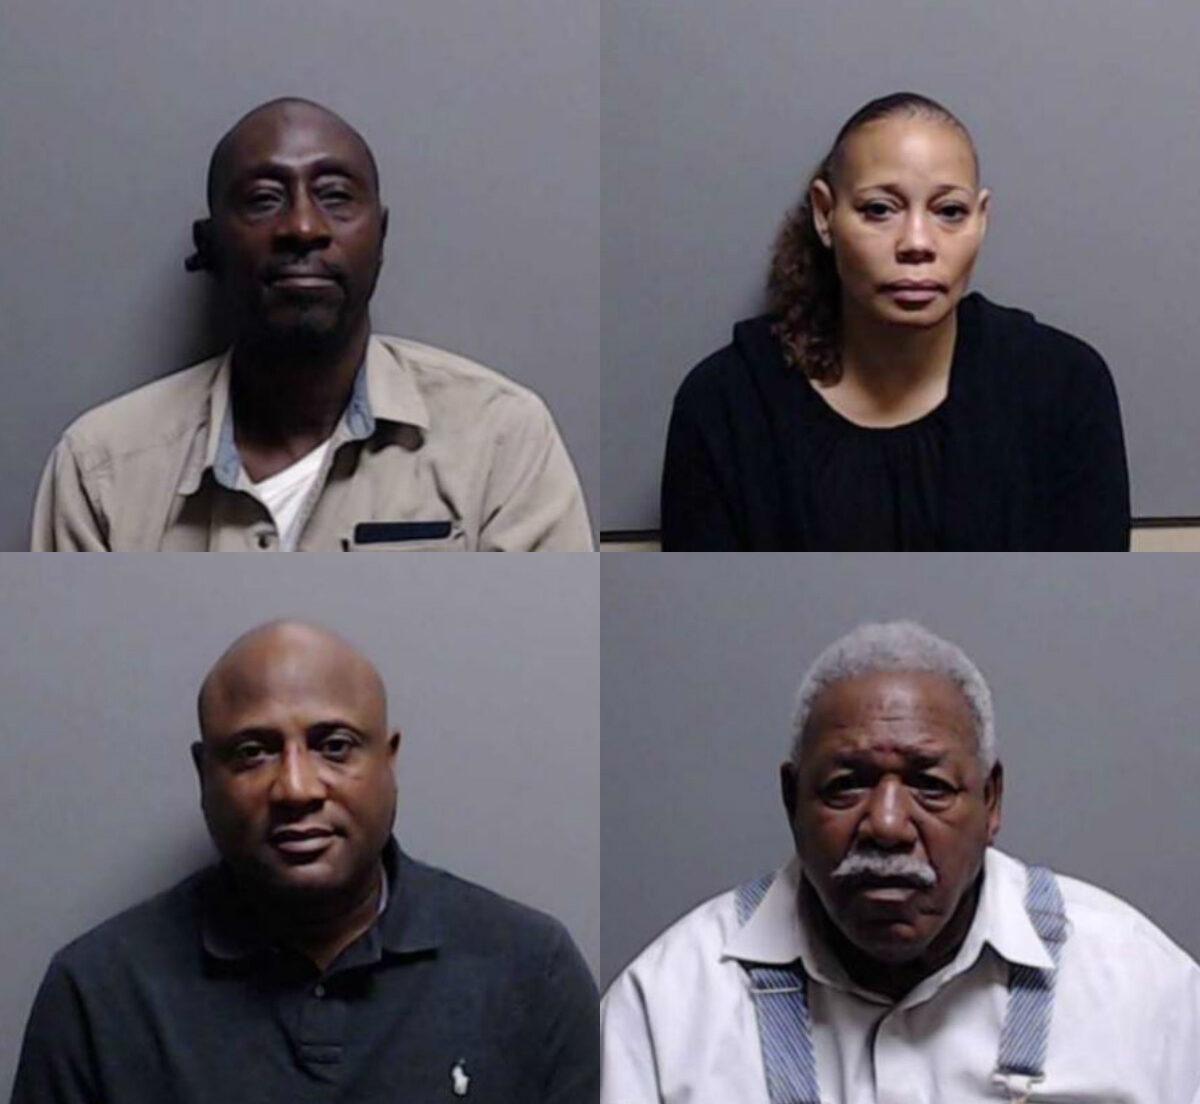 Gregg County Commissioner Shannon Brown, bottom left, his wife Marlena Jackson, top right, DeWayne Ward, top left, and Charlie Burns, bottom right, were charged with voter fraud in Gregg County, Texas. (Gregg County)